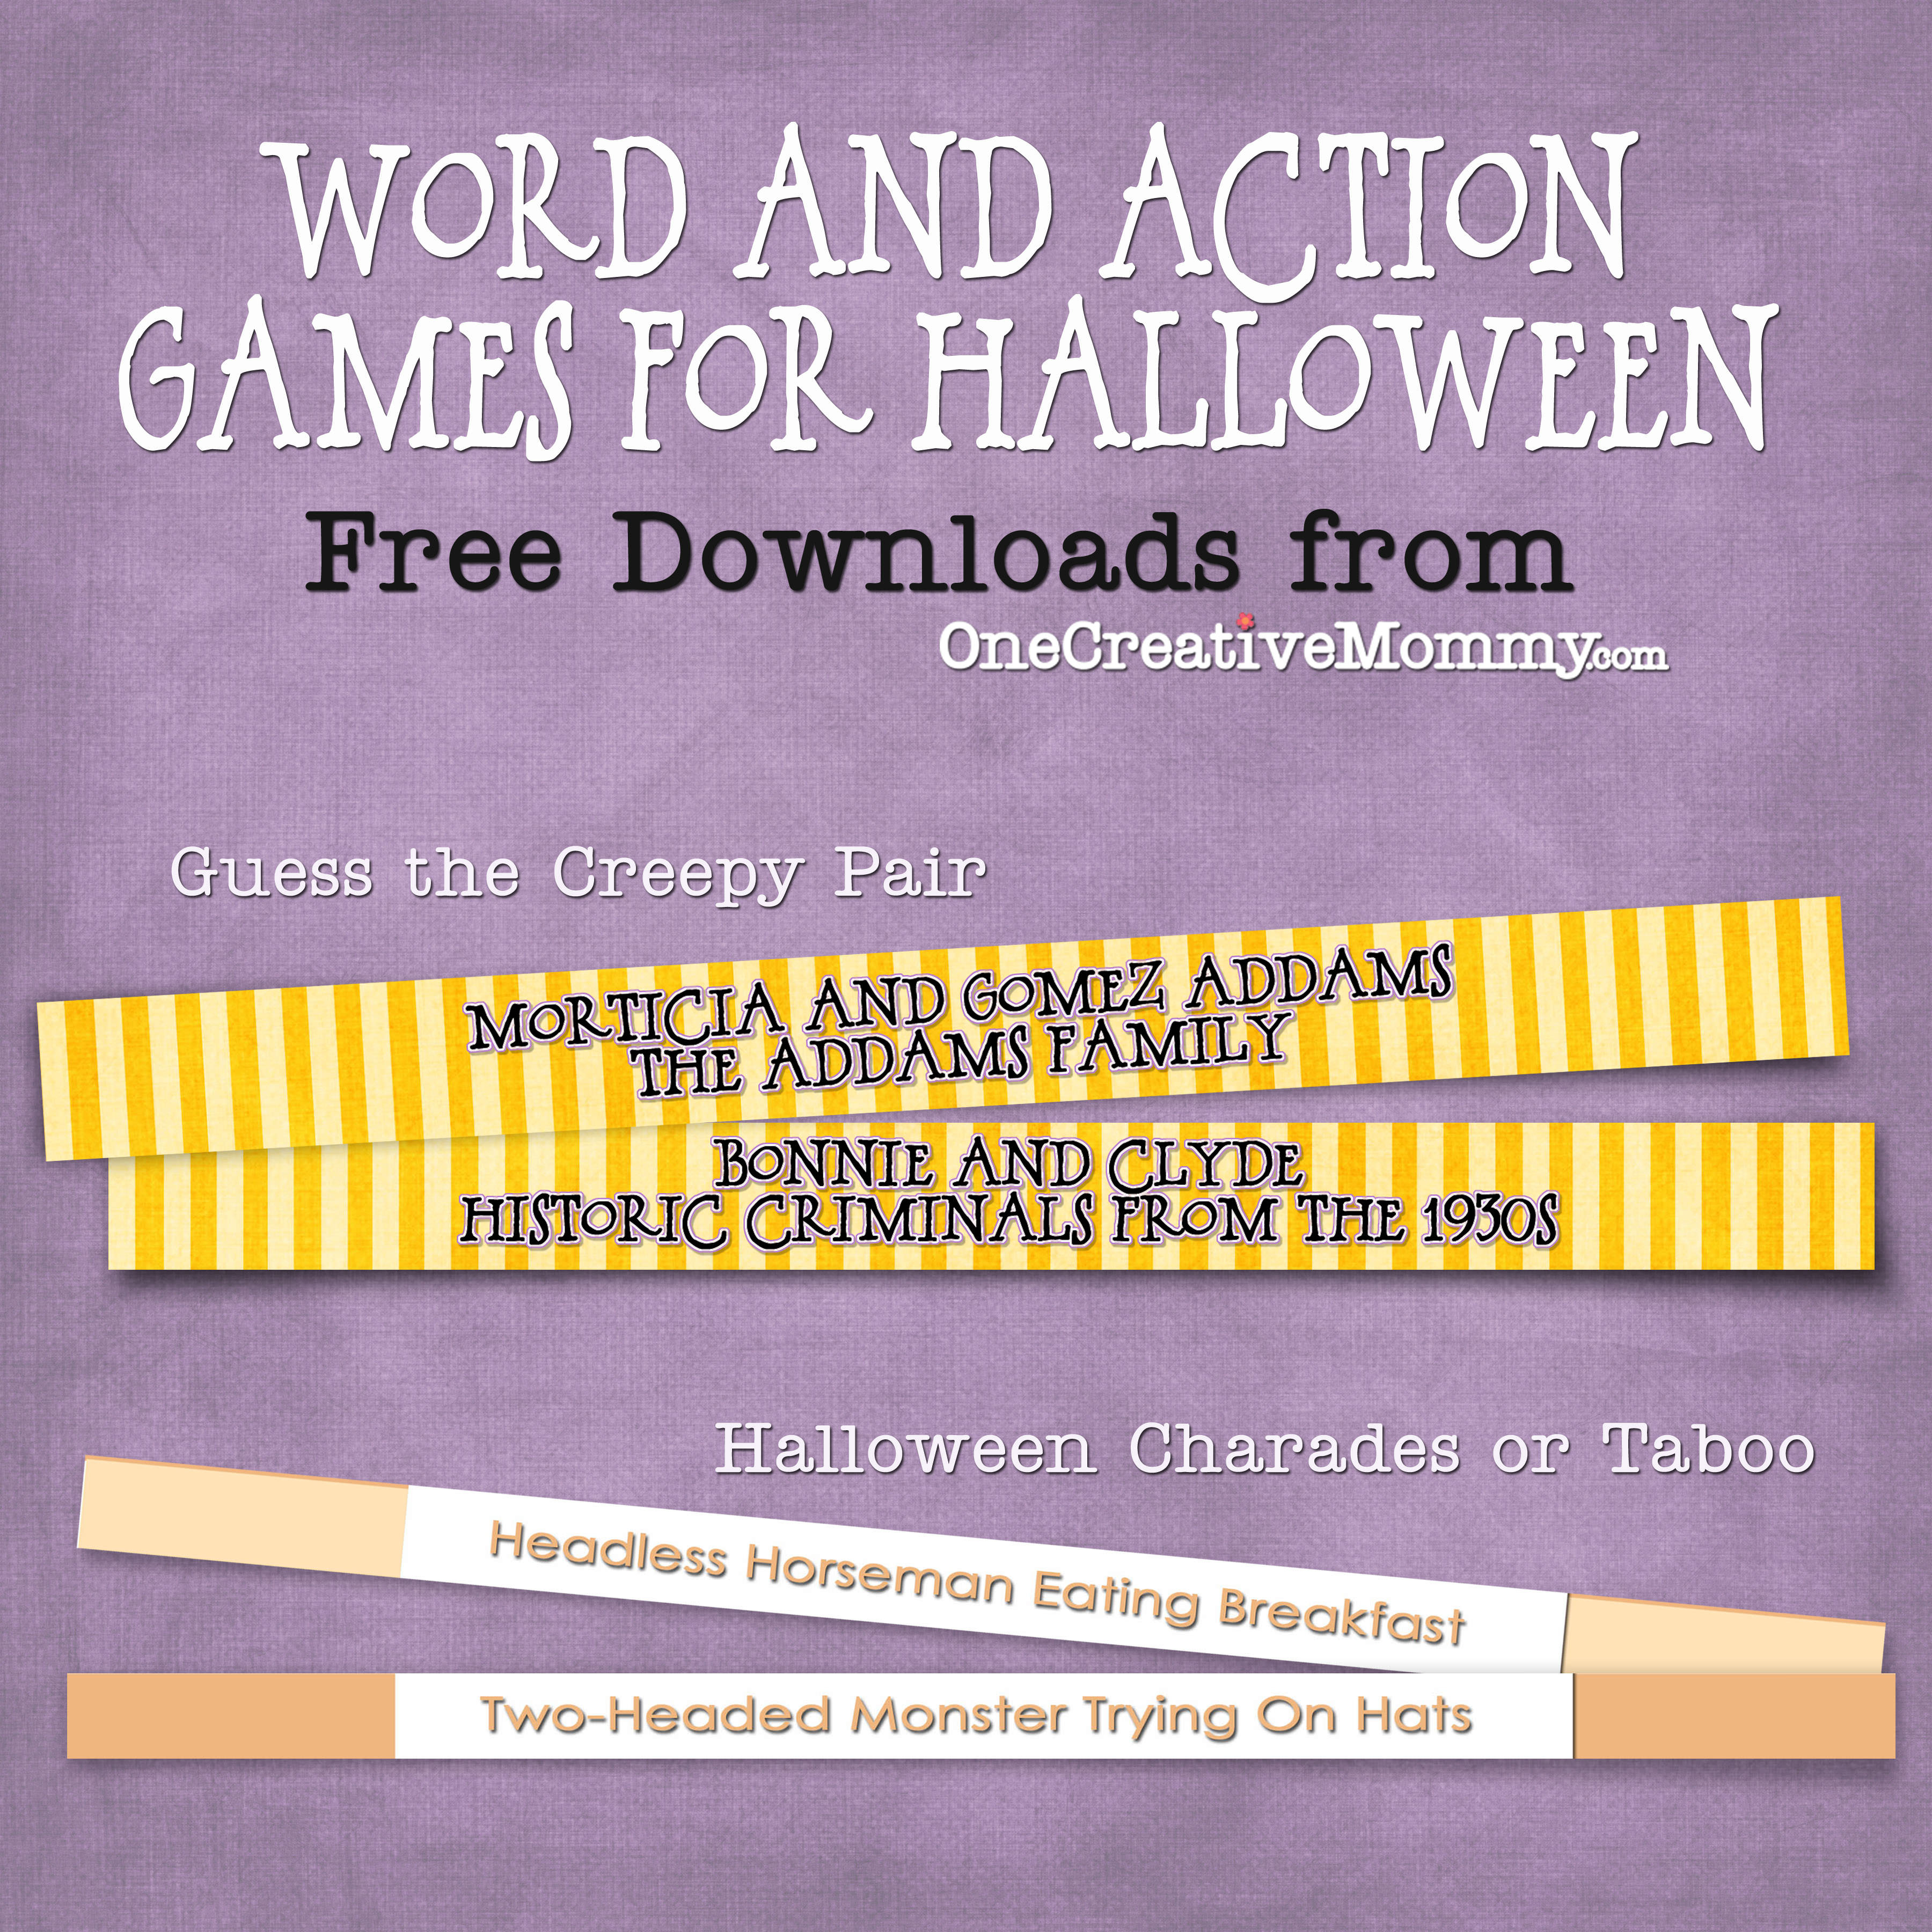 Halloween Party Games {Free Downloads} - Onecreativemommy - Free Printable Halloween Party Games